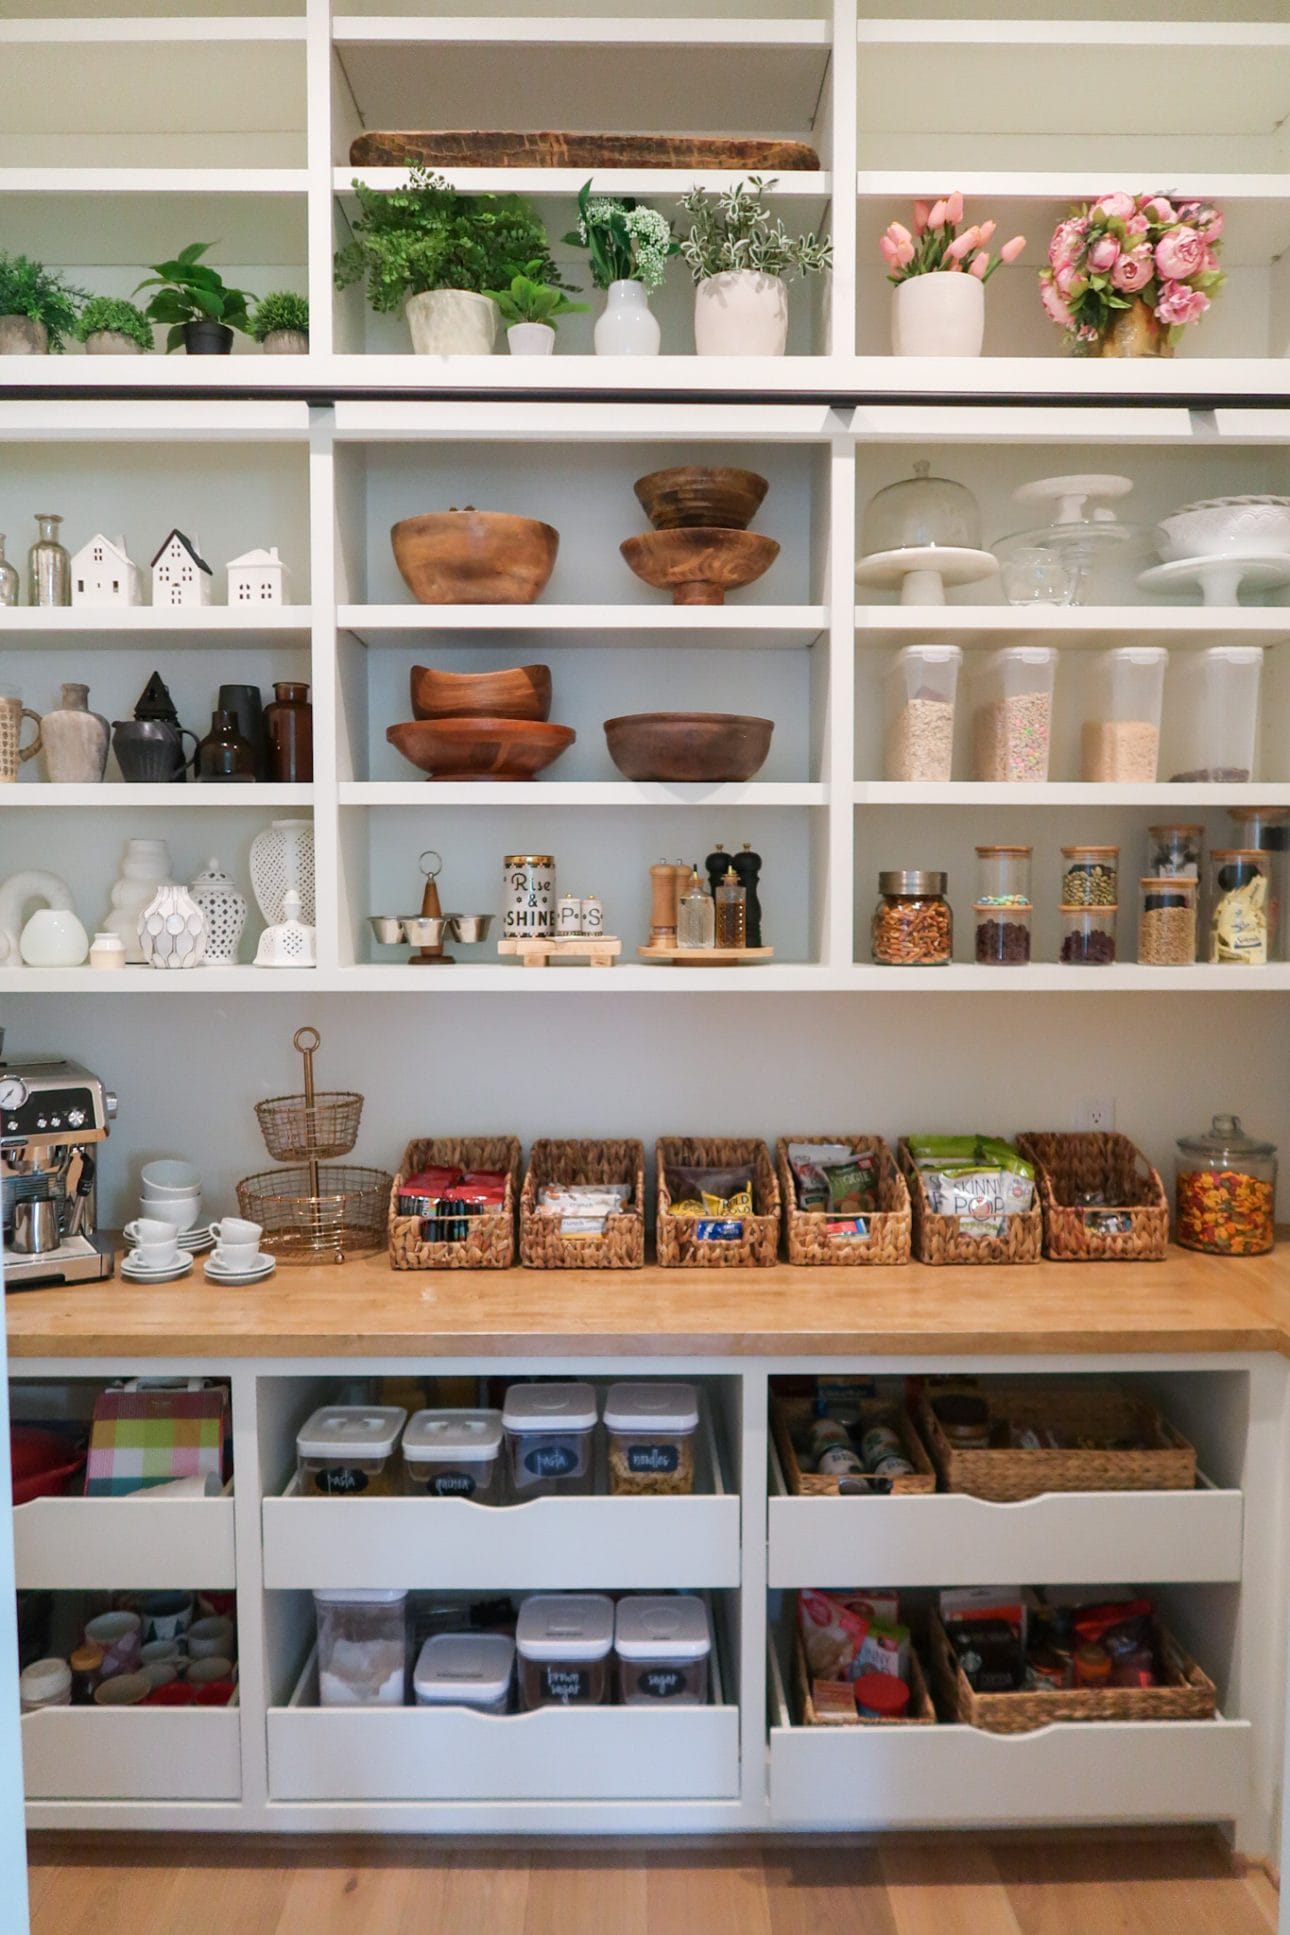 How to Maintain the Best Pantry Organization - The Design Twins